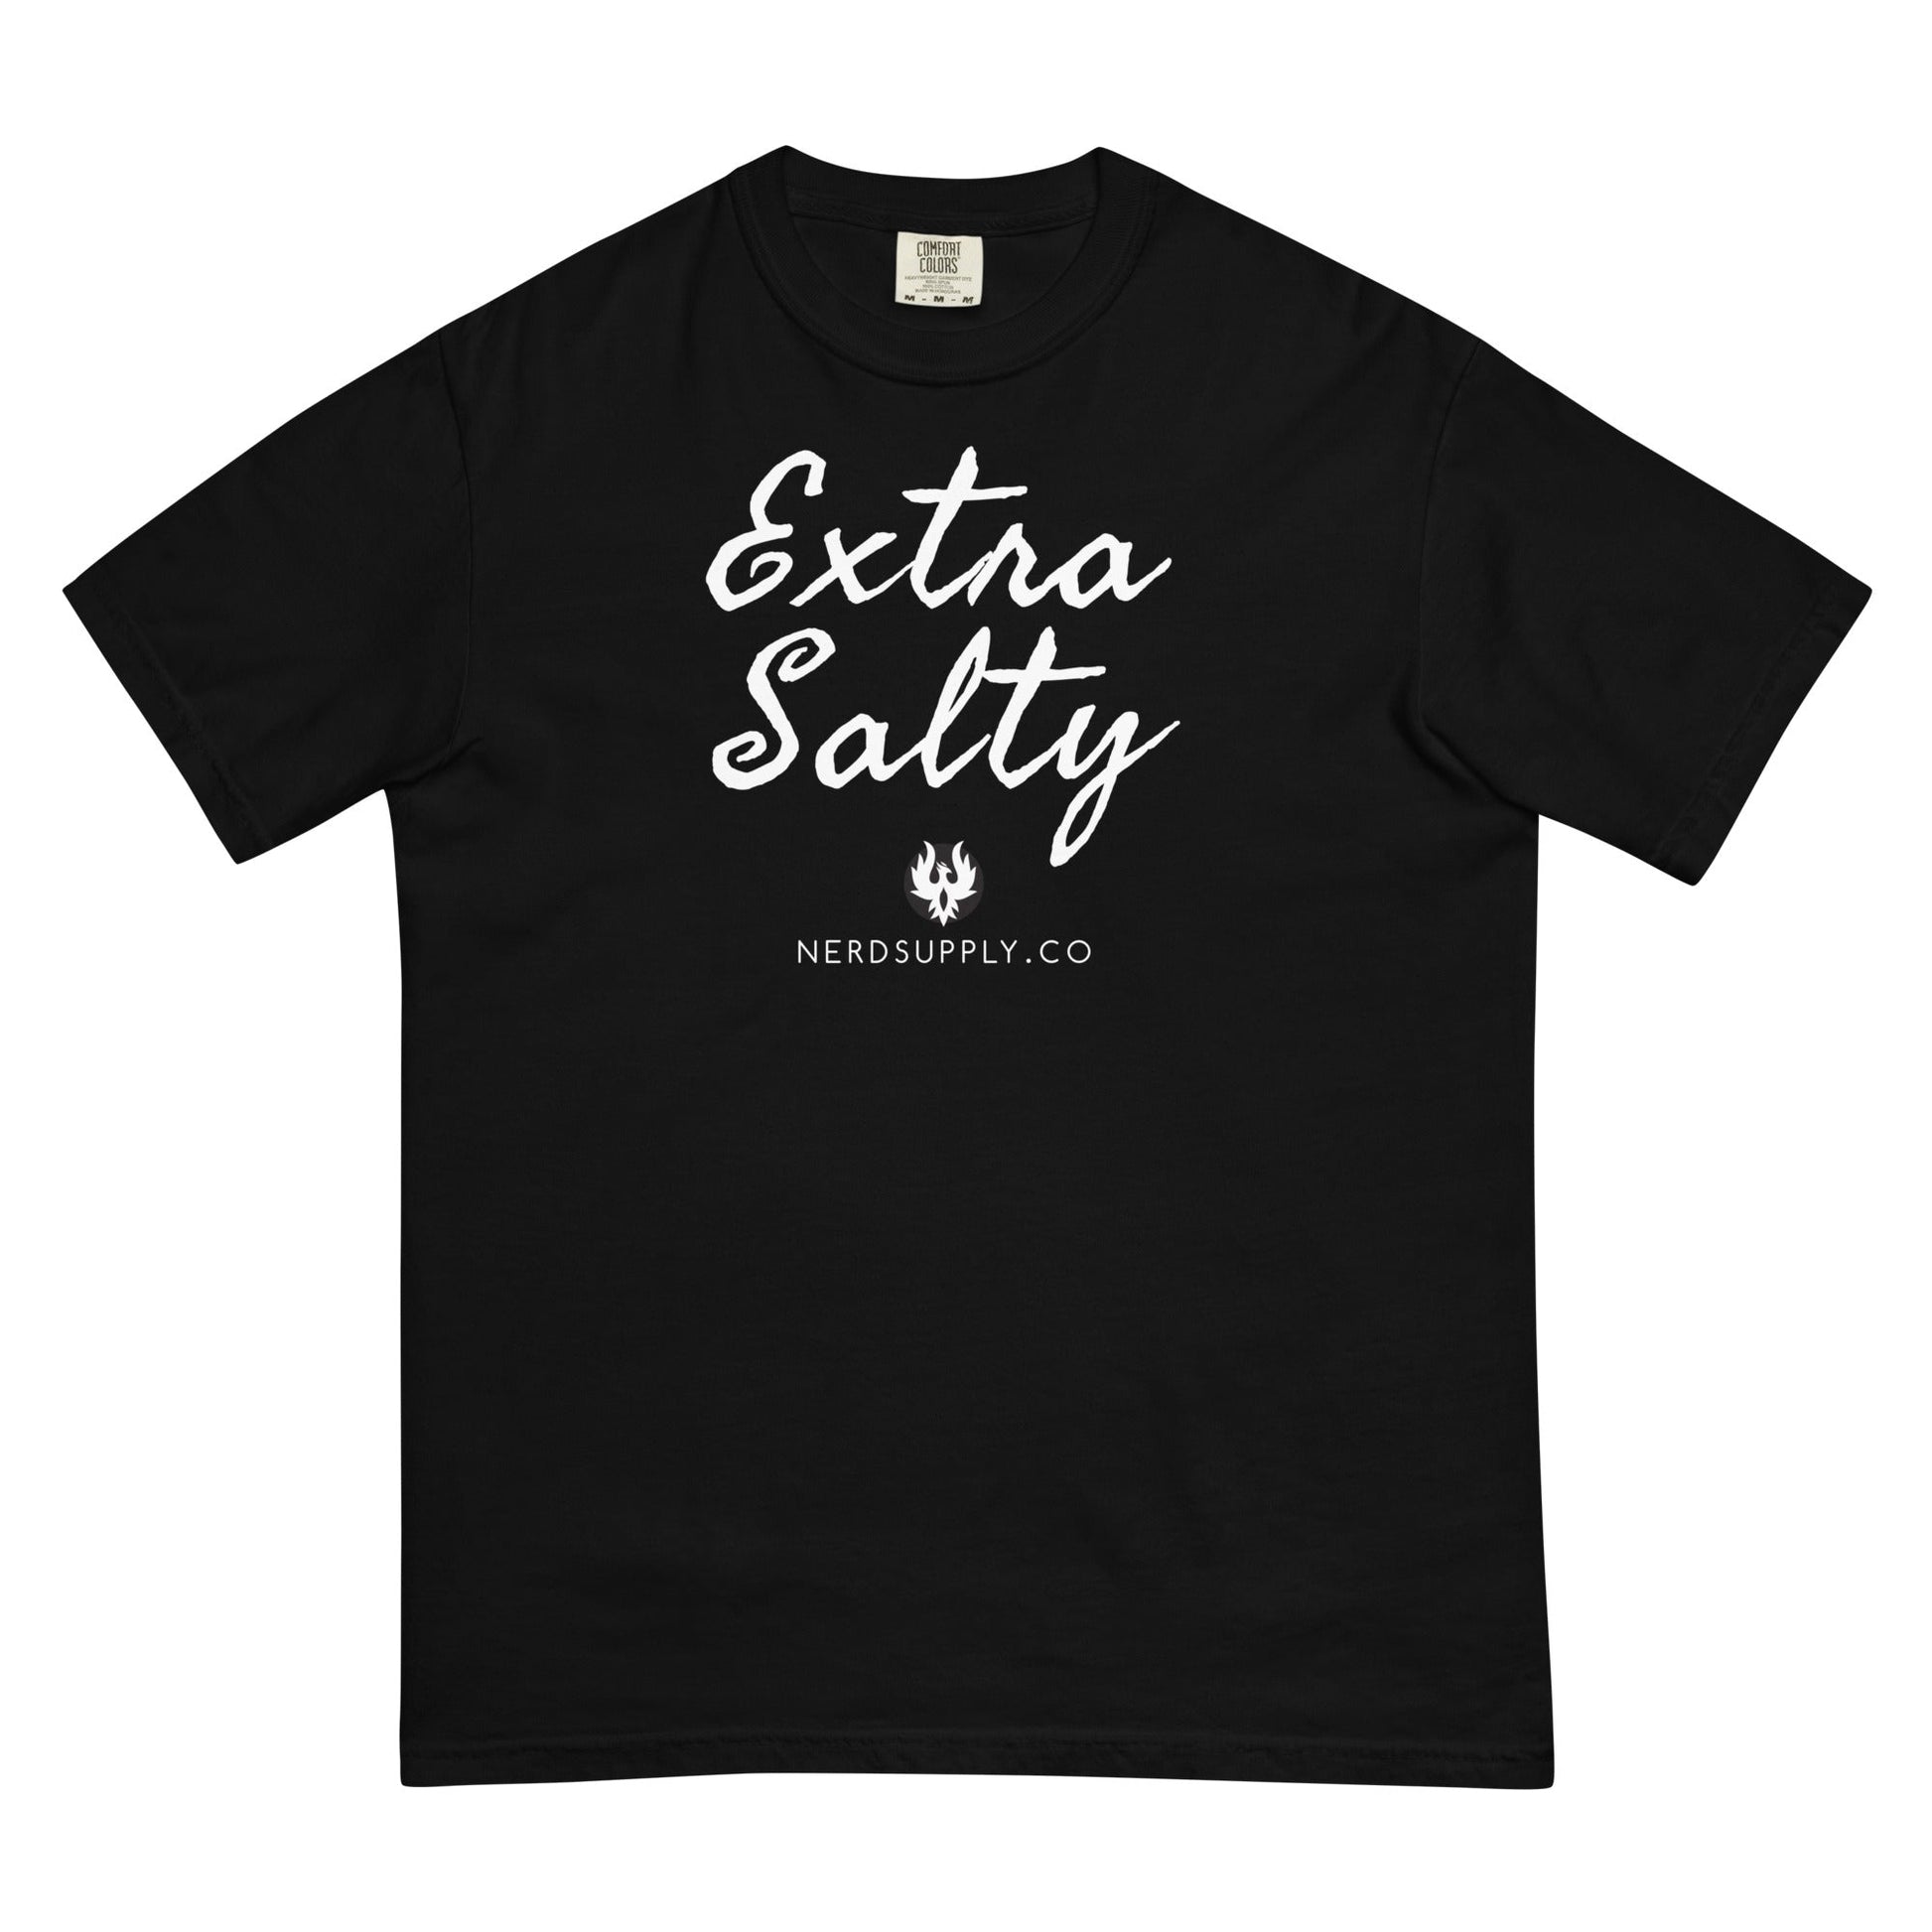 "Extra Salty" t-shirt - The Nerd Supply Company